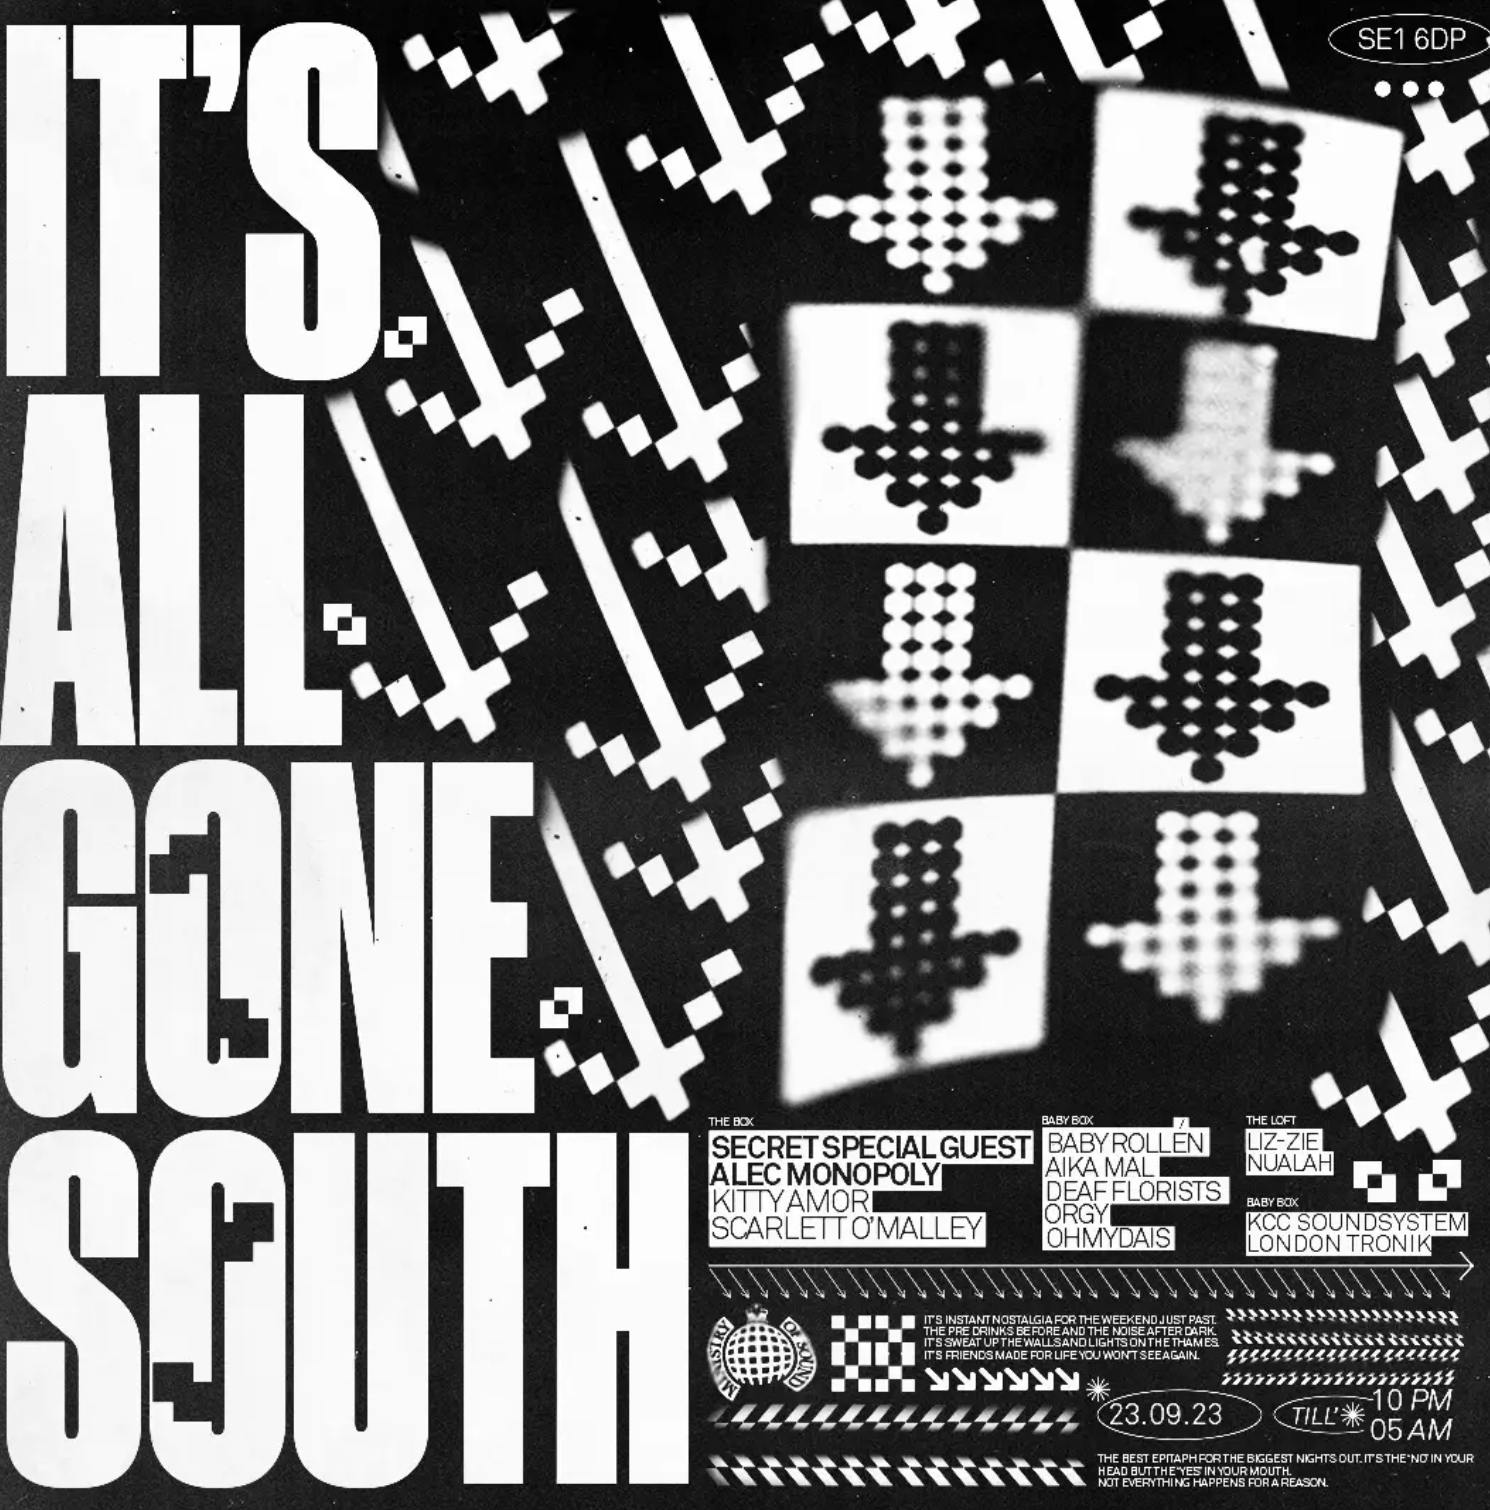 Ministry of Sound Presents: IT’S ALL GONE SOUTH w/ Secret Special Guest, Alec Monopoly, Kitty Amor & more